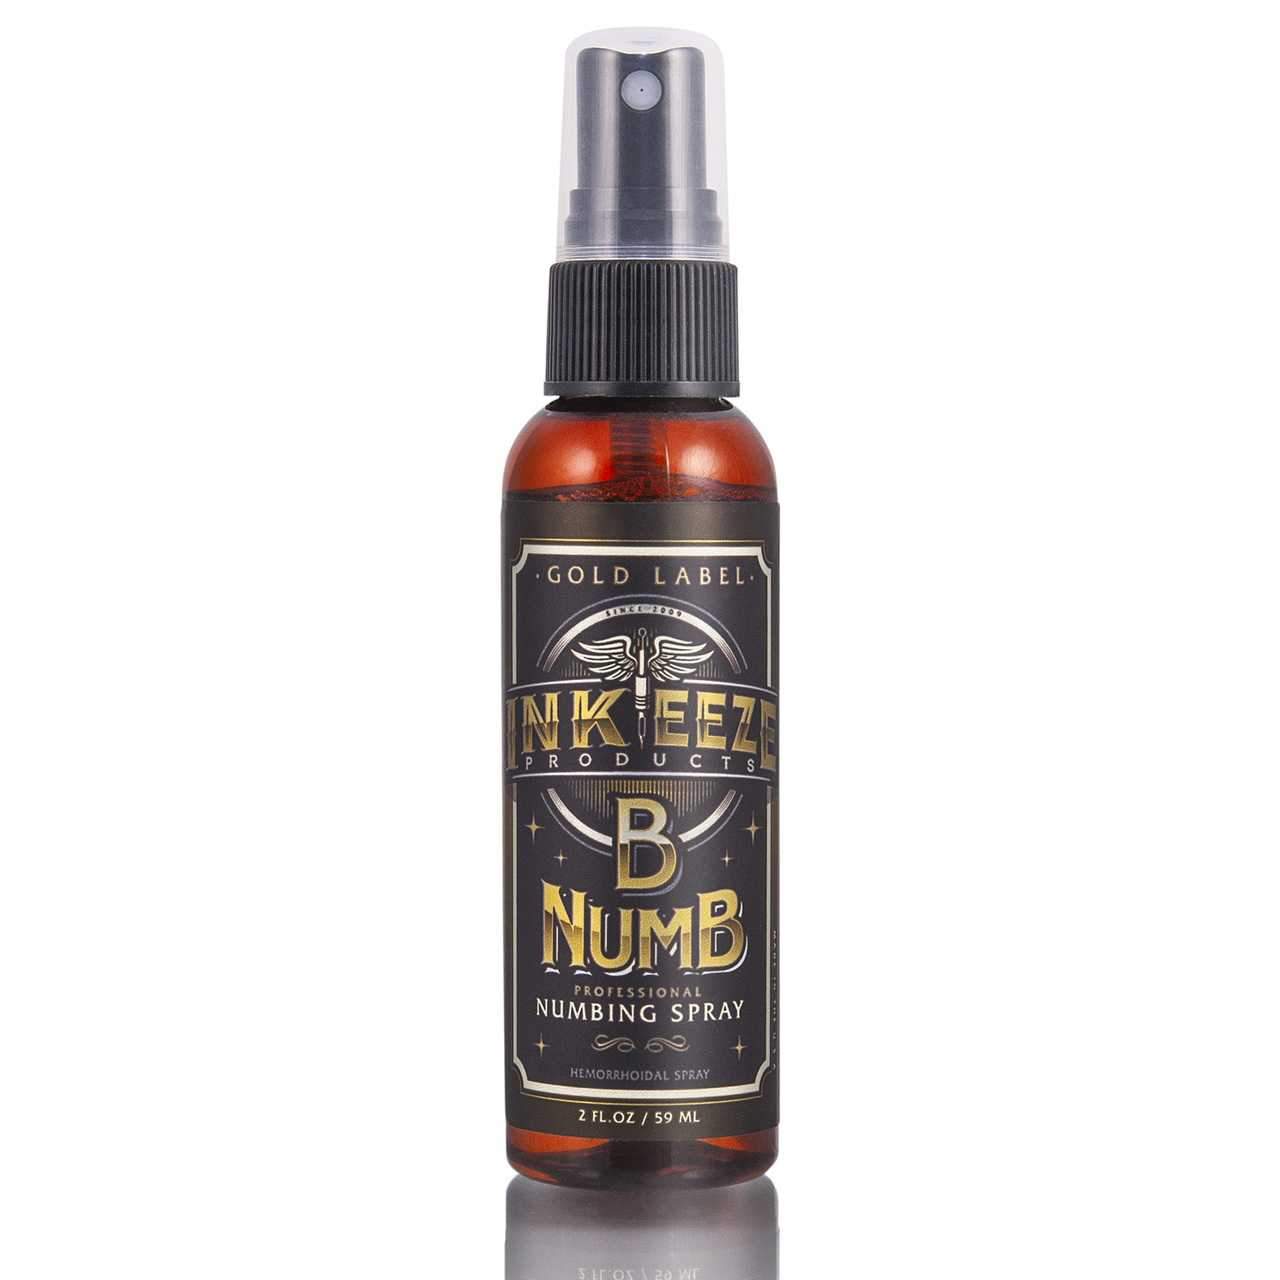 2oz Bottle of Gold Label Numbing Spray by INK-EEZE